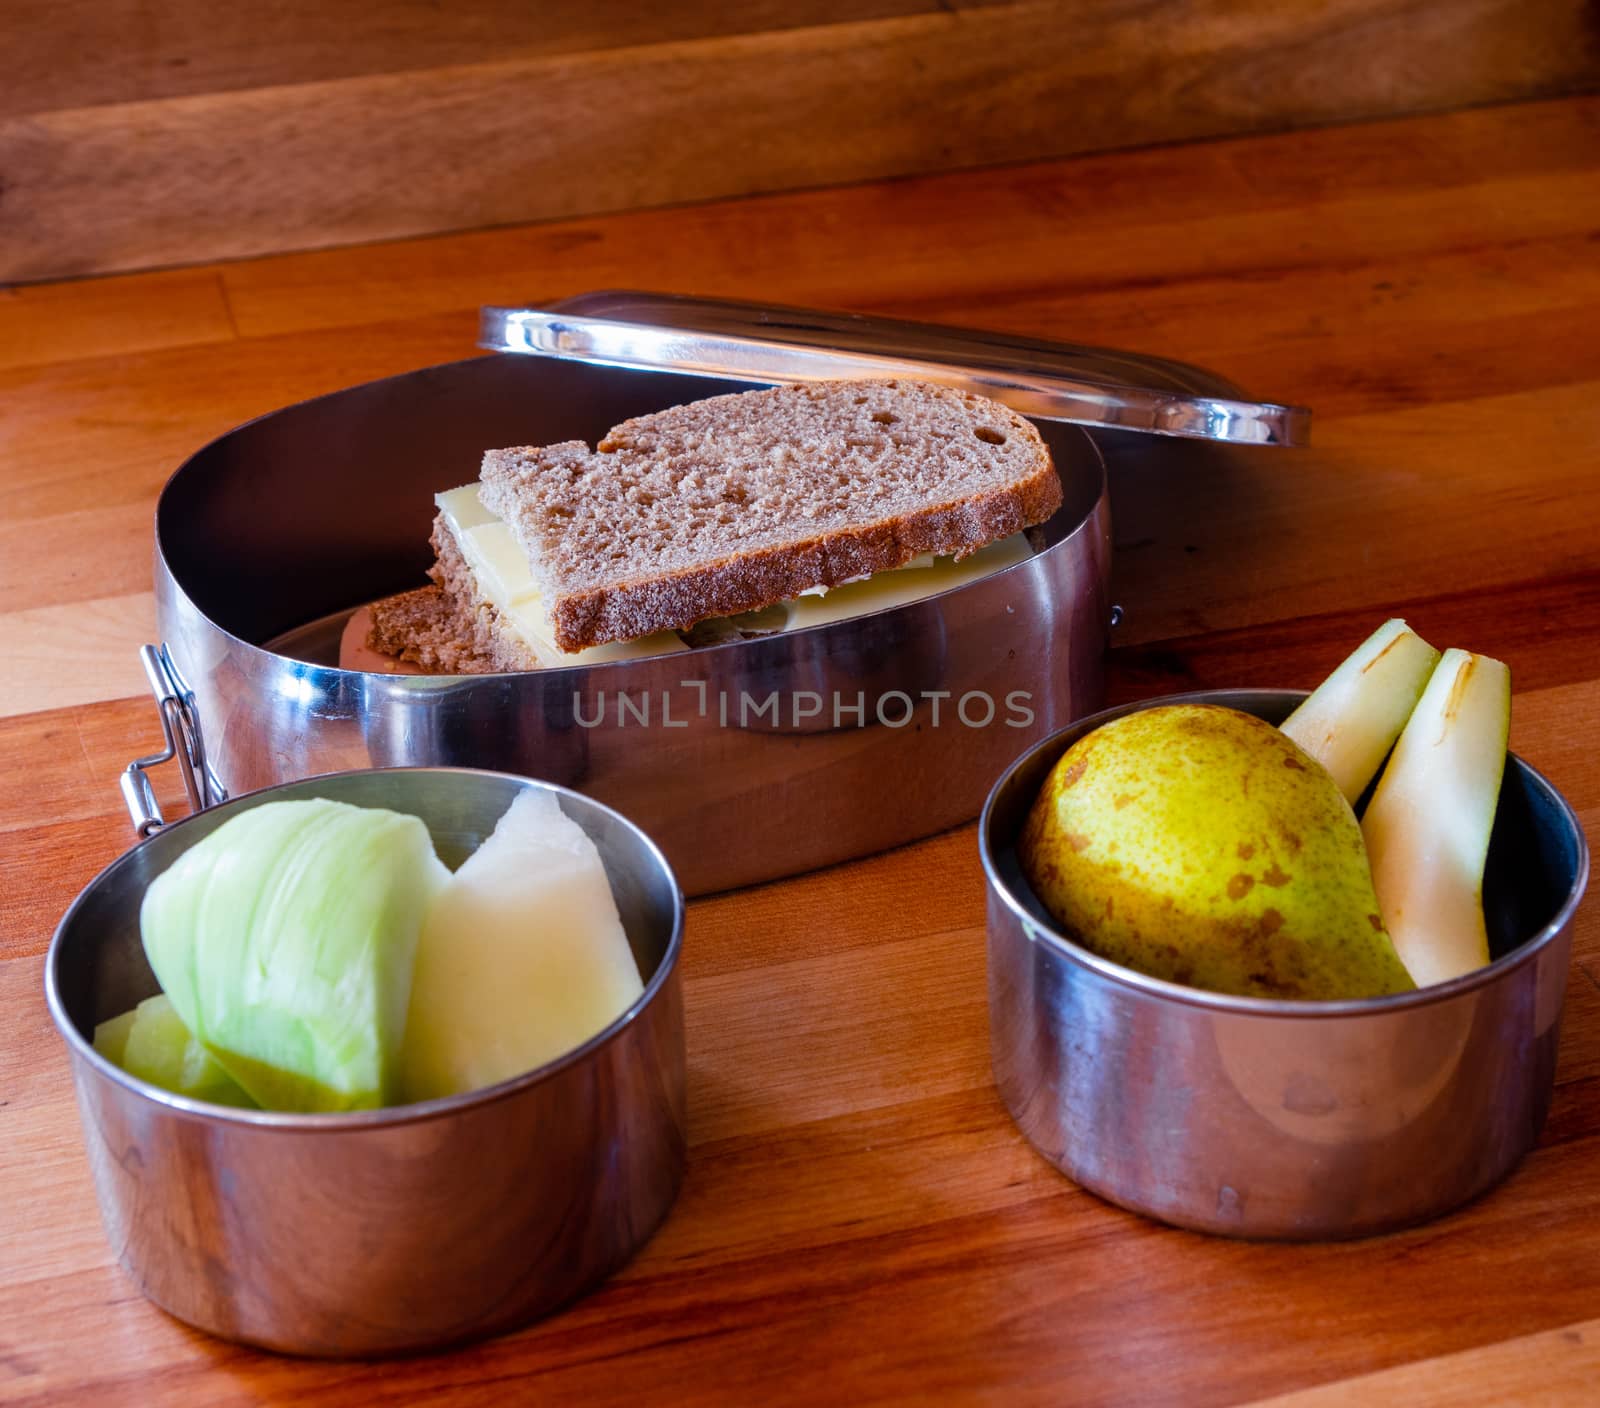 school lunch packed in stainless steel lunchbox on wooden surface